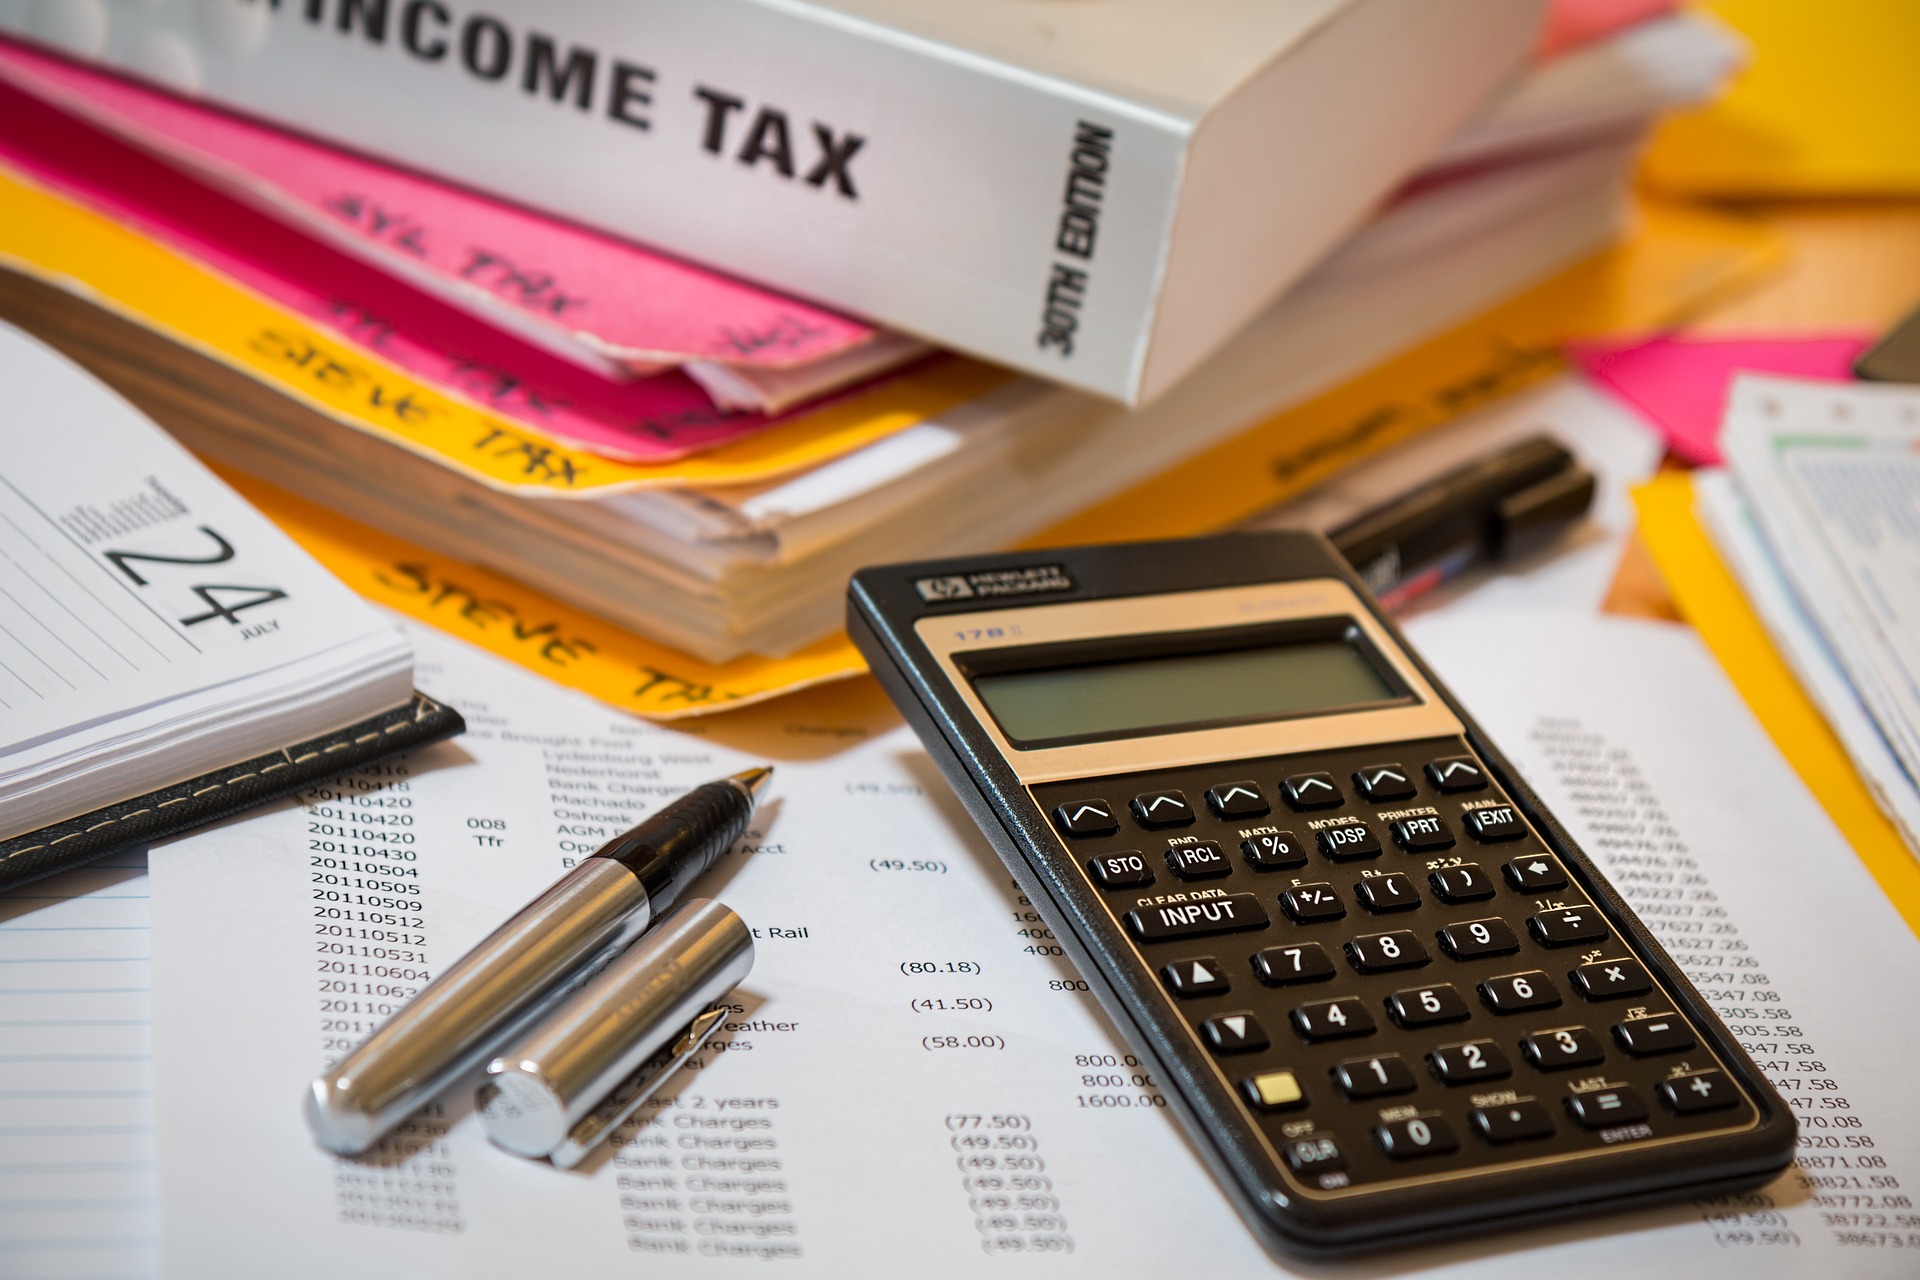 Folder, calculator and other documents to complete the tax return.